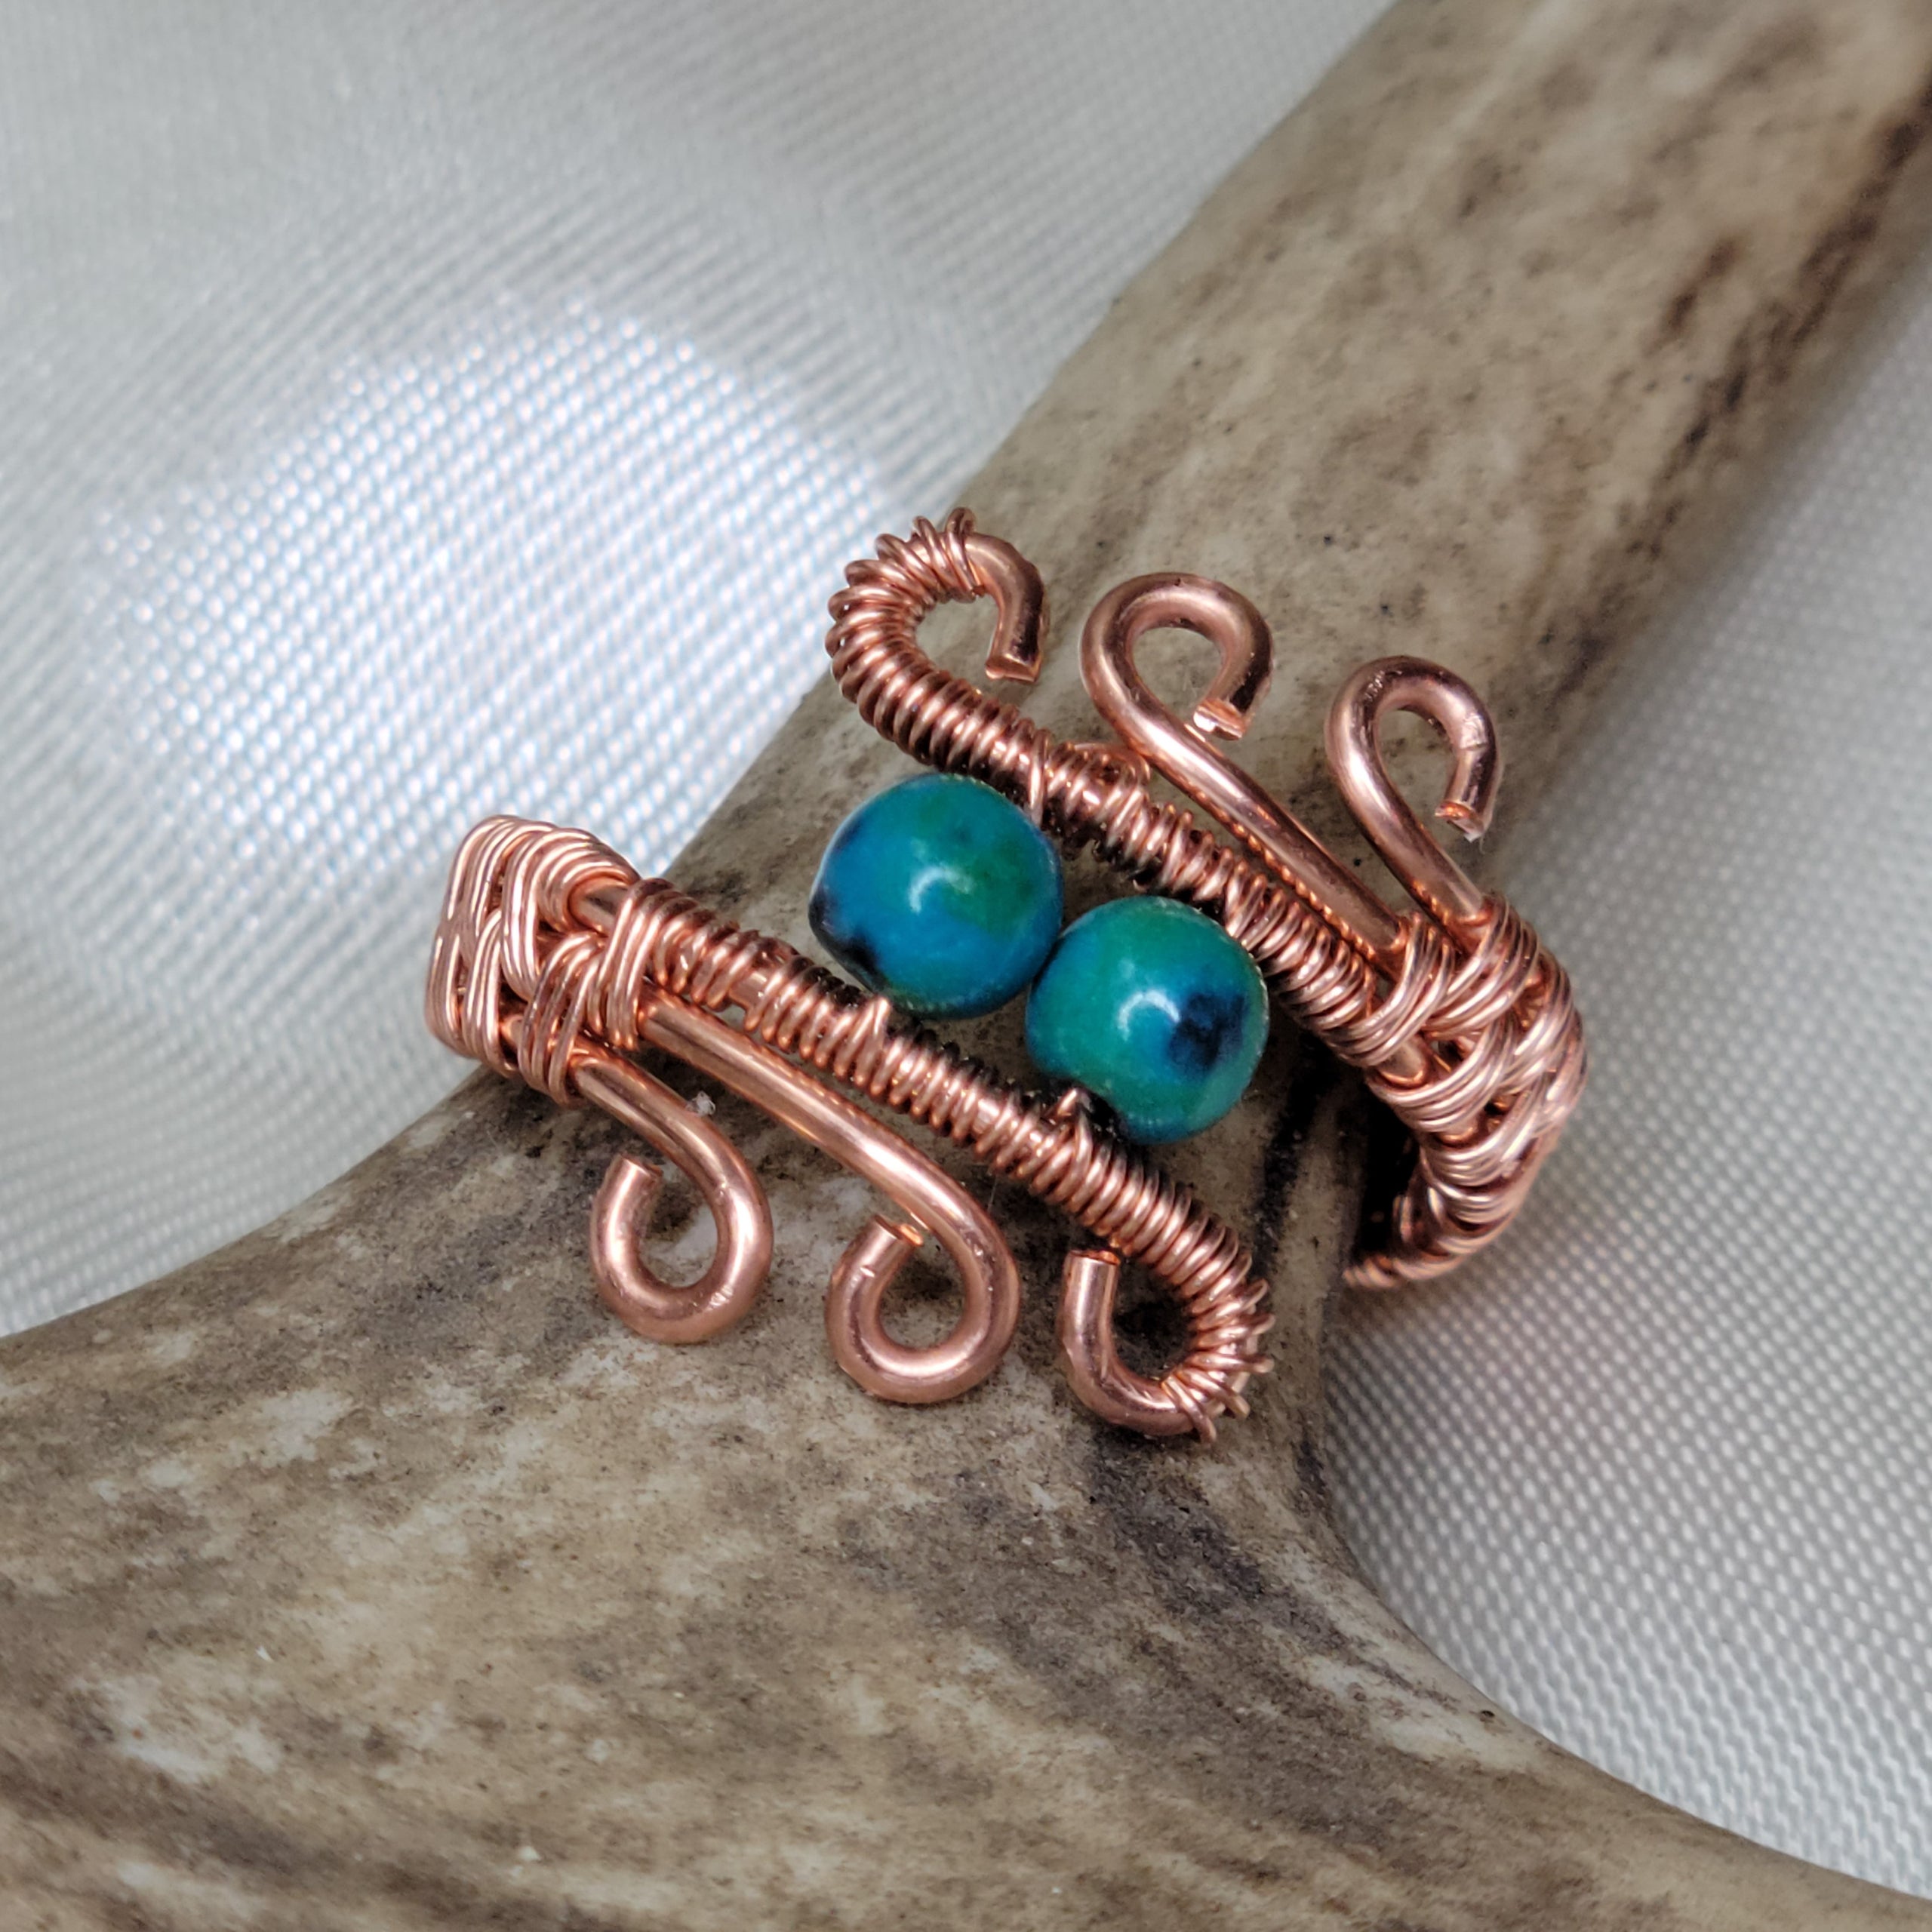 Handcrafted Copper Wire Jewelry 